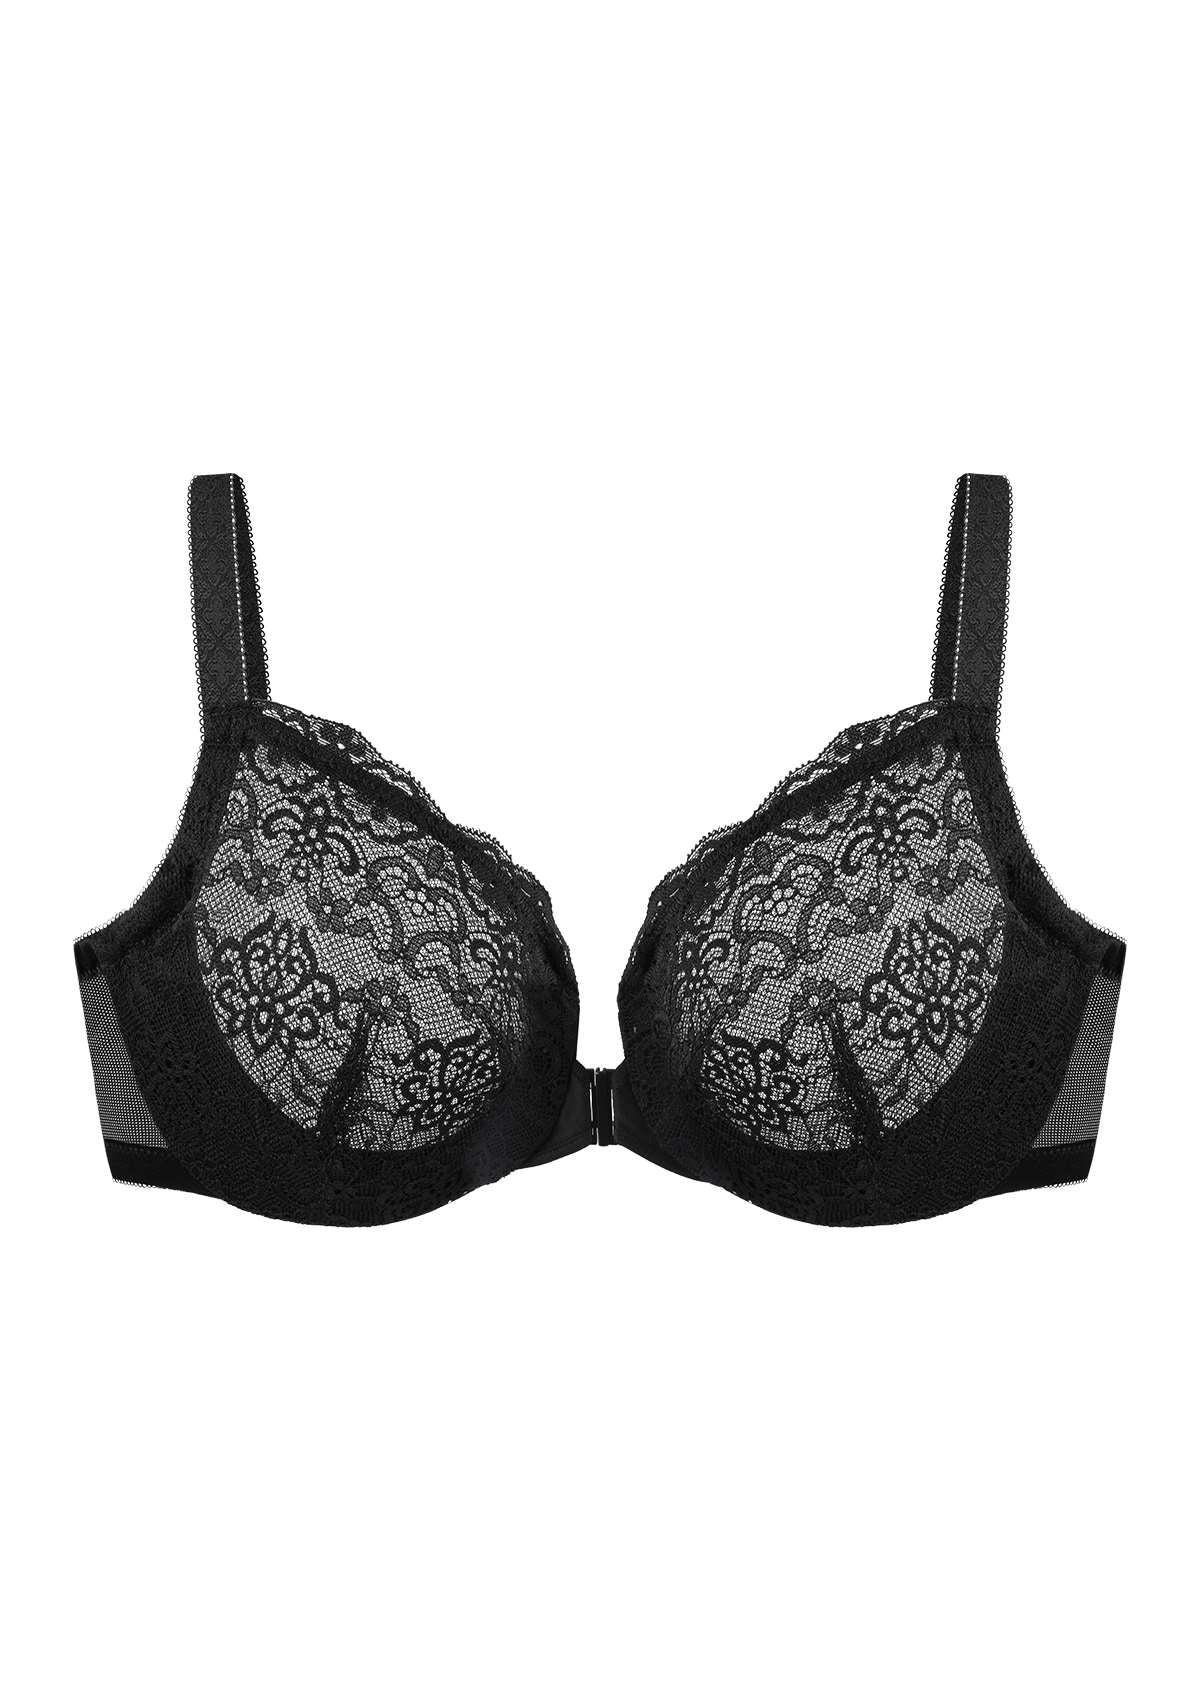 HSIA Nymphaea Front-Close Unlined Retro Floral Lace Back Smoothing Bra - Black / 36 / D